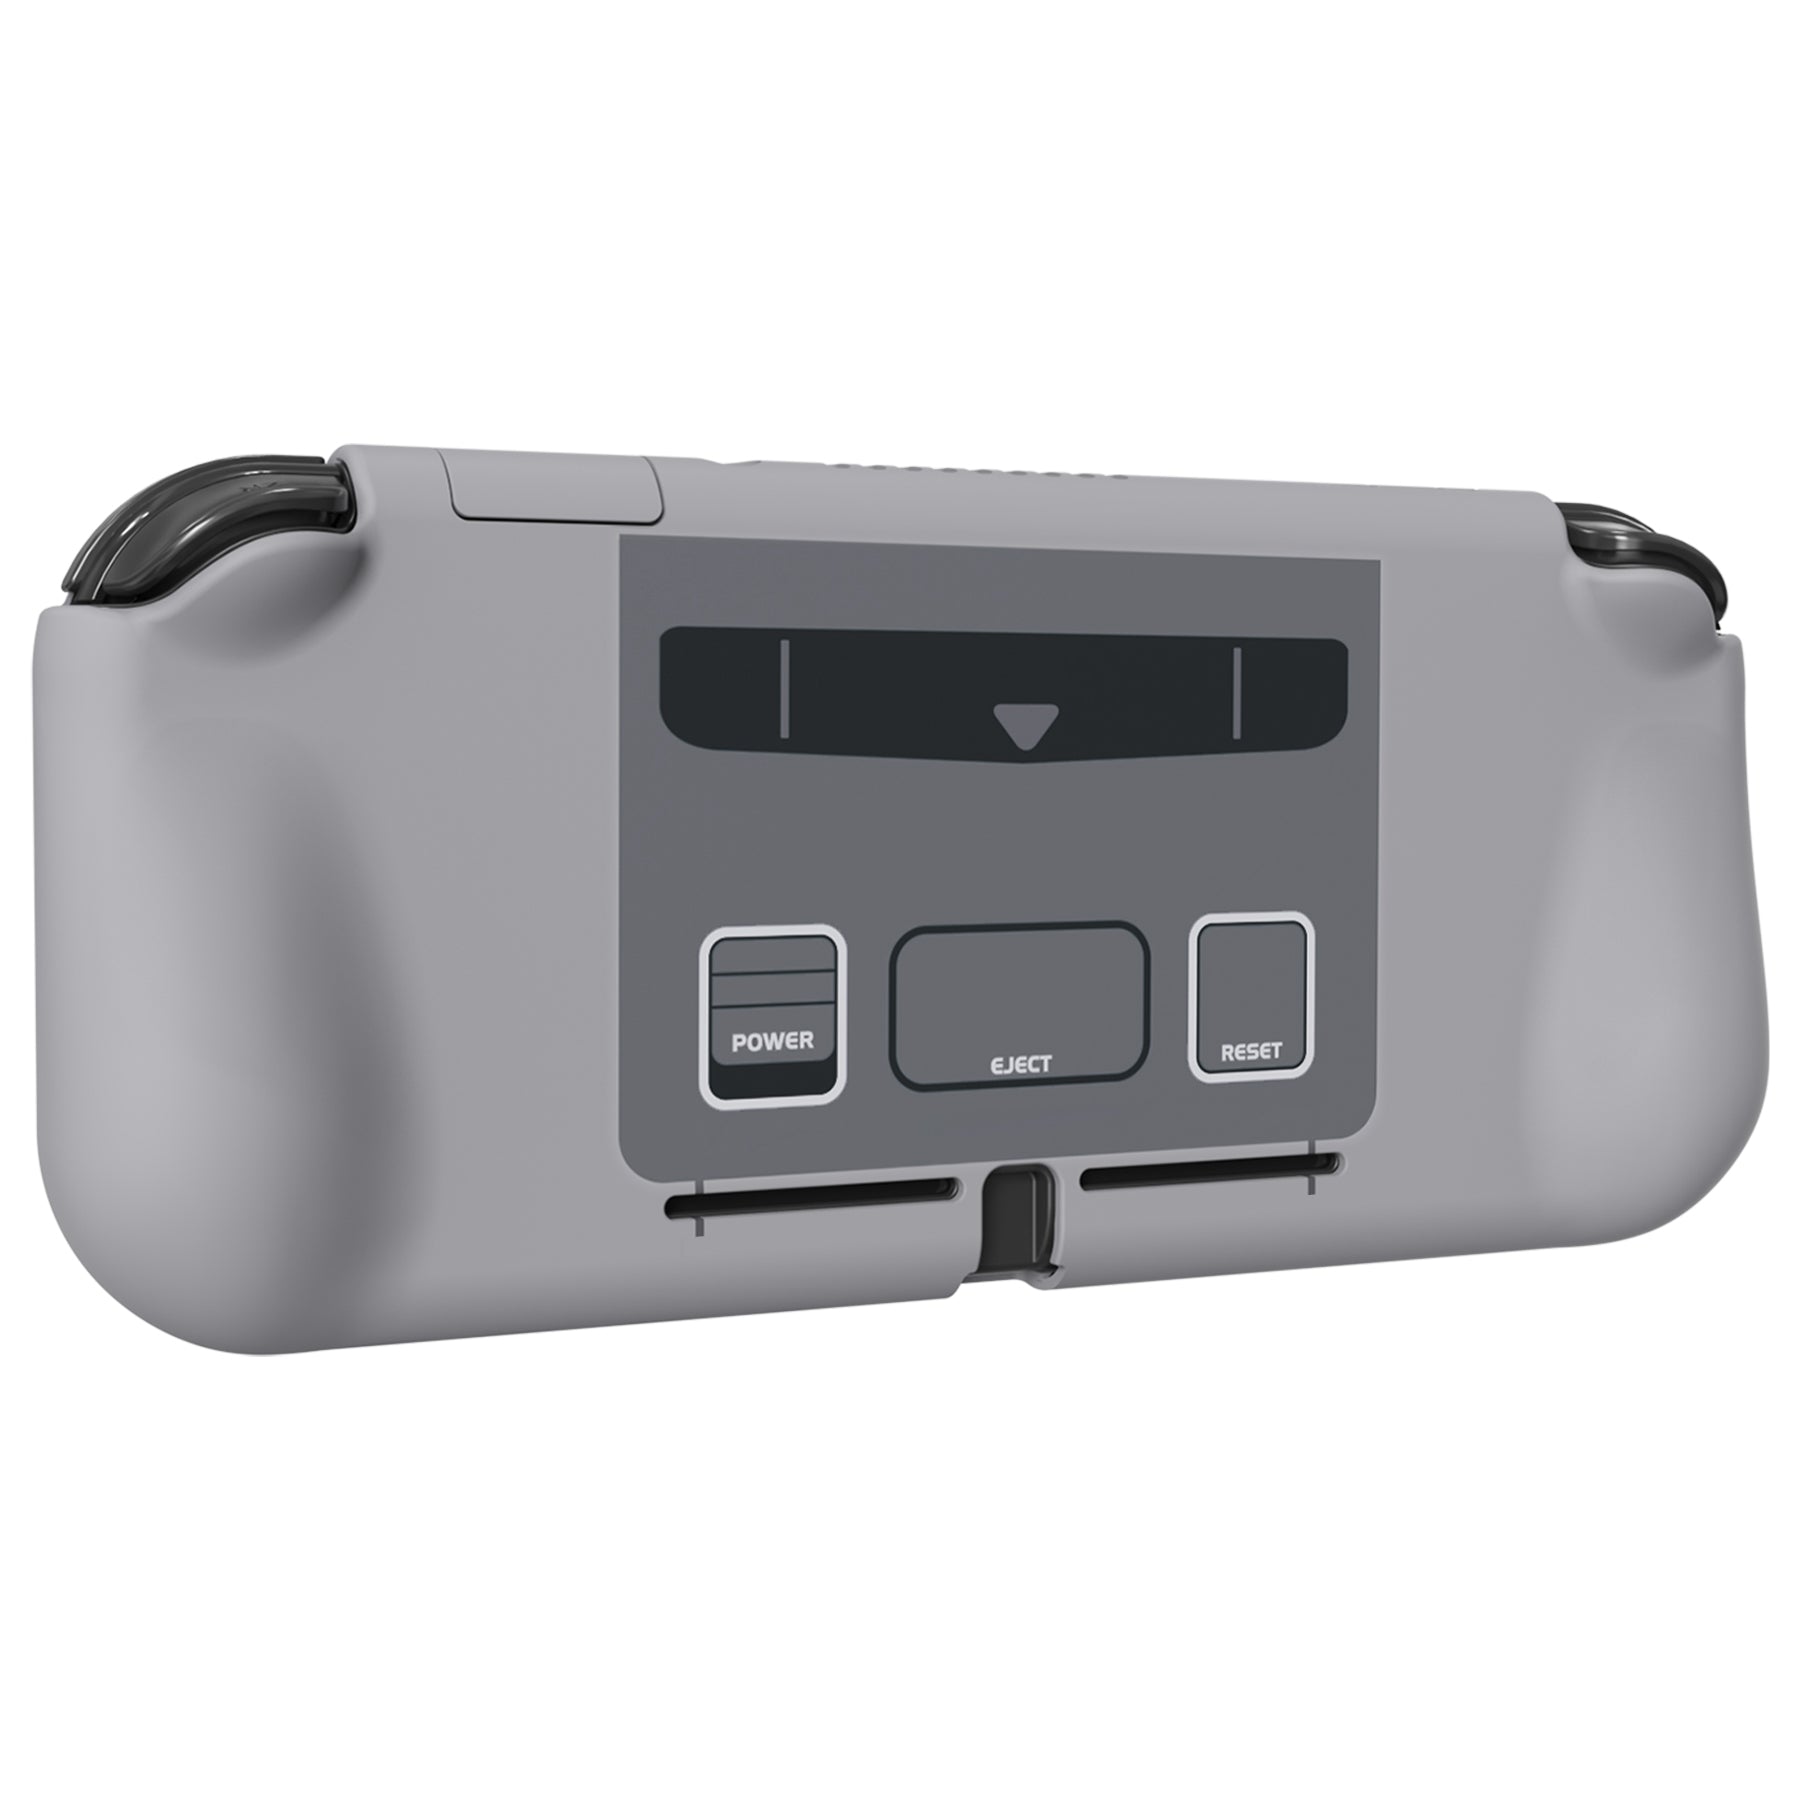 PlayVital ZealProtect Protective Case for Nintendo Switch Lite, Hard Shell Ergonomic Grip Cover for Switch Lite w/Screen Protector & Thumb Grip Caps & Button Caps - SFC SNES Classic EU Style - PSLYY7001 PlayVital